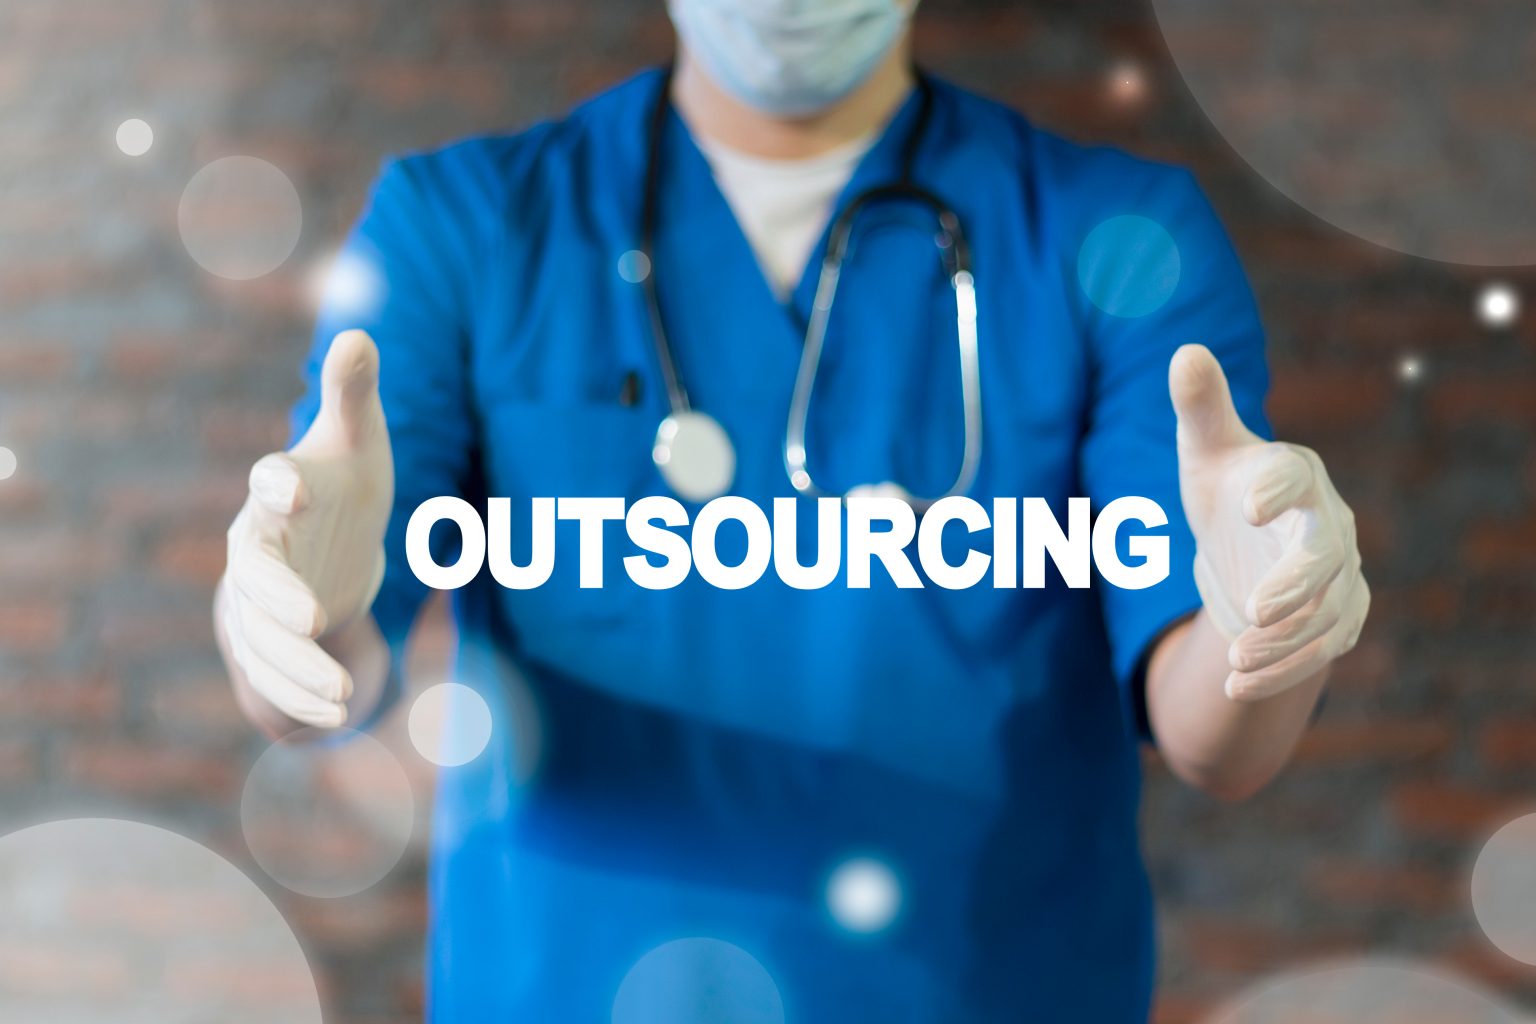 Payers and providers find that outsourcing streamlines business processes: Part 1